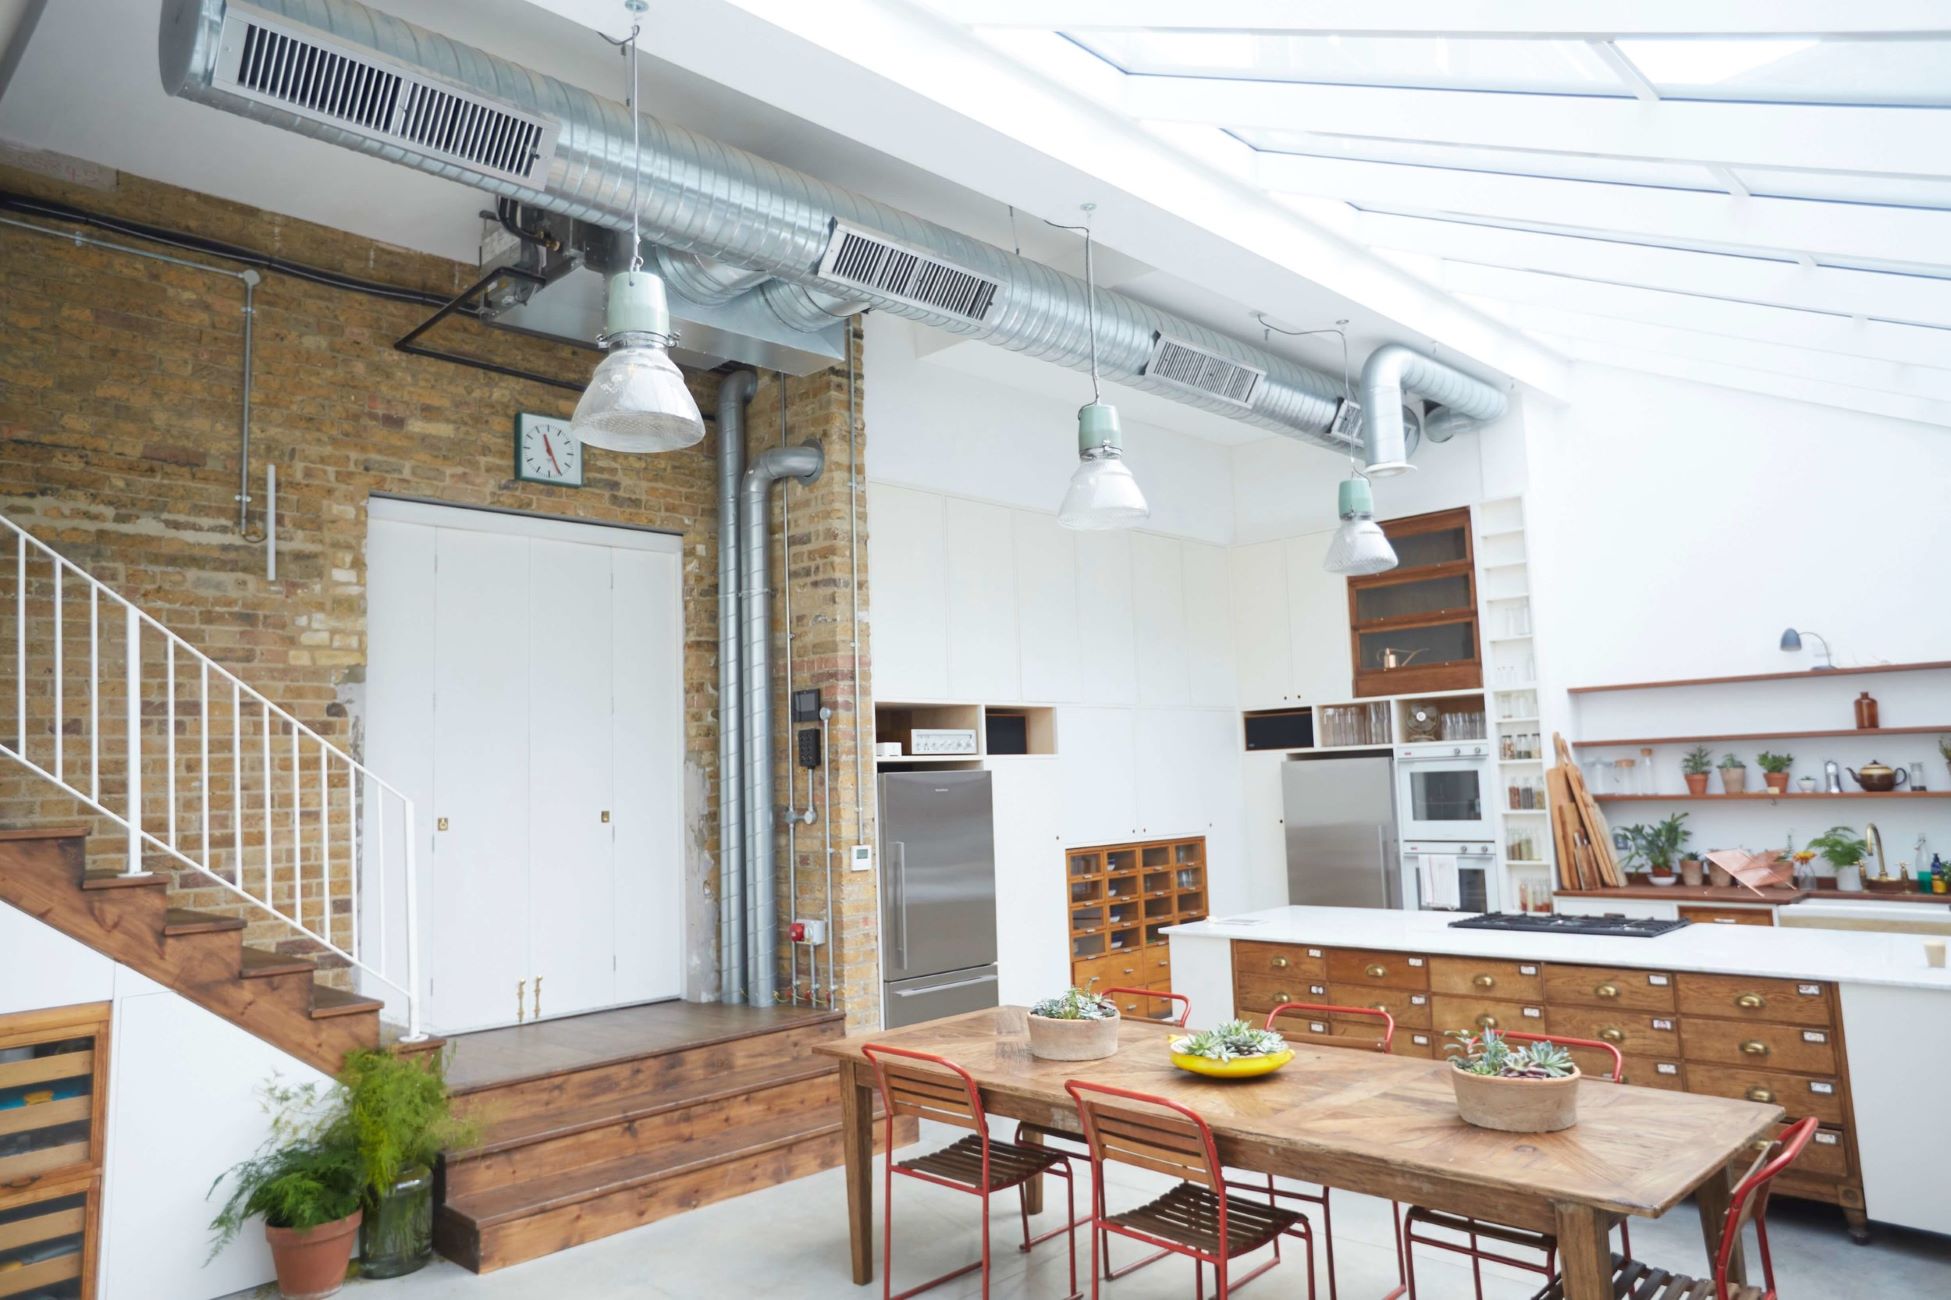 How To Design Ductwork For A House